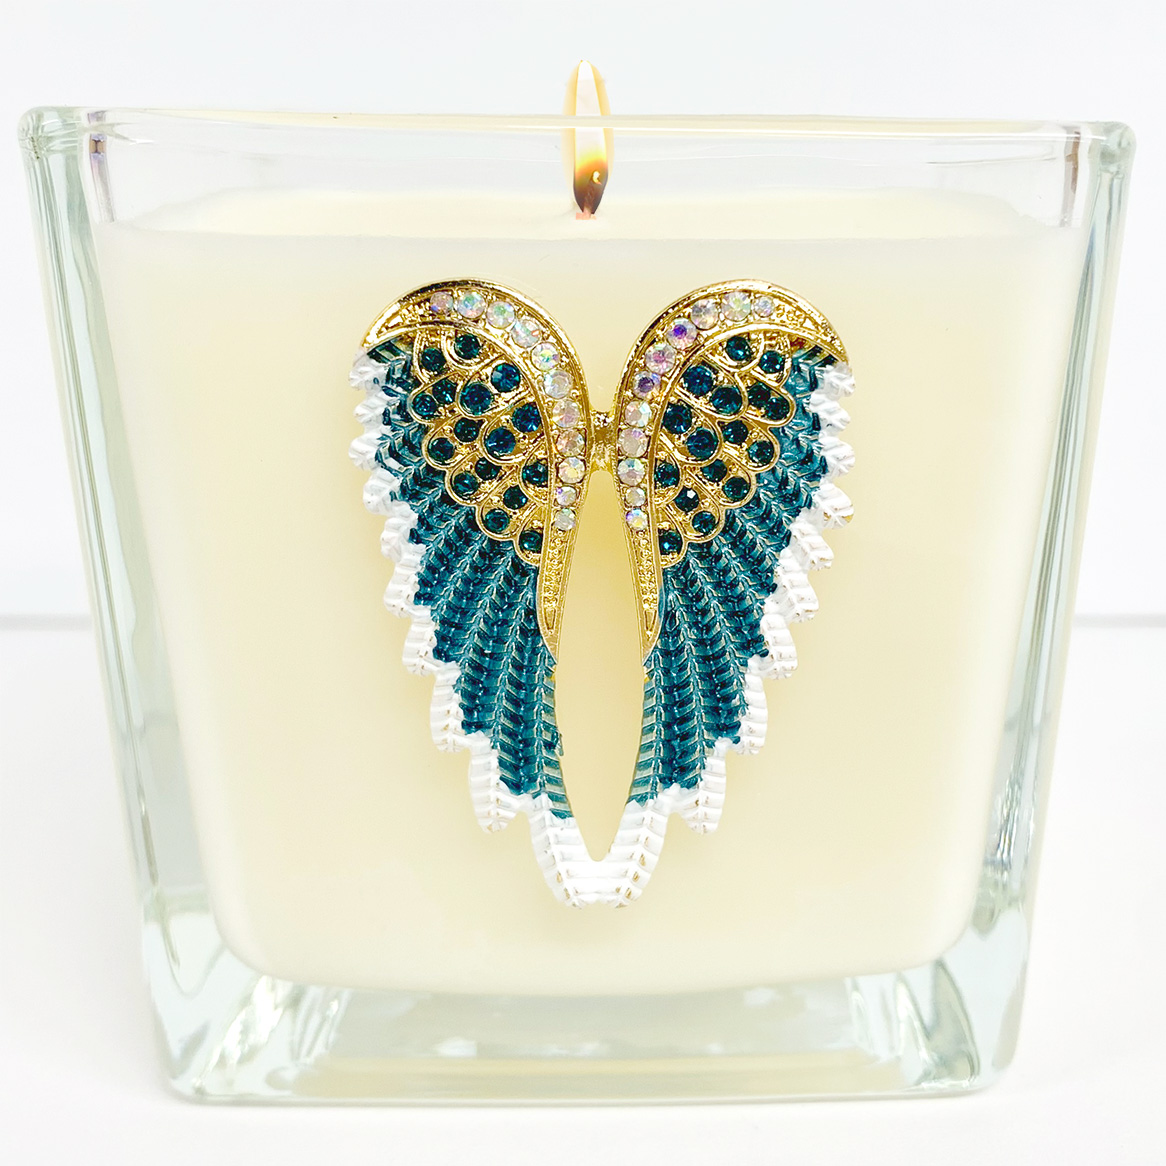 TEAL JEWELED ANGEL WINGS CANDLE - HYSSOP